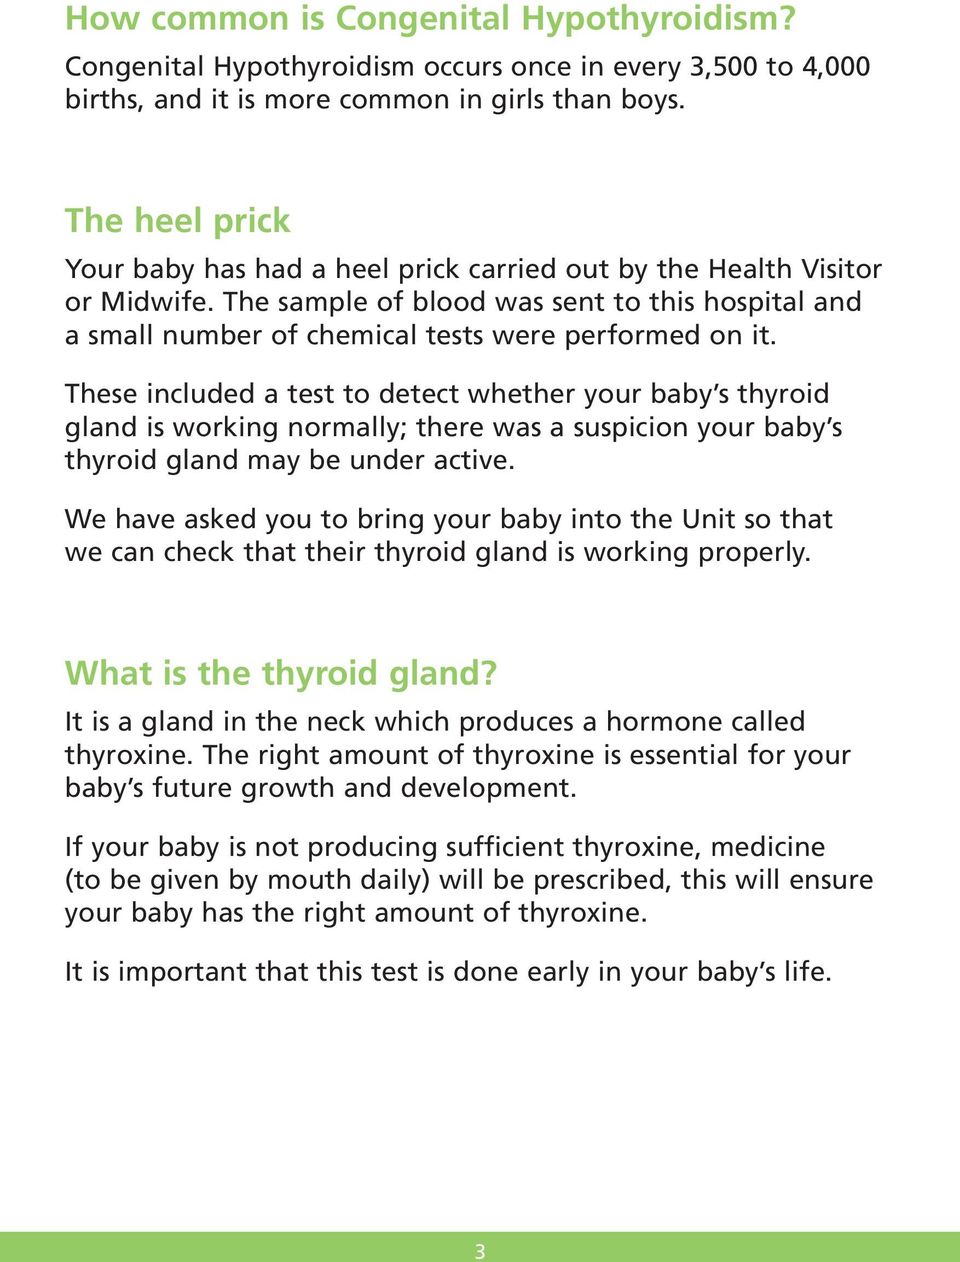 These included a test to detect whether your baby s thyroid gland is working normally; there was a suspicion your baby s thyroid gland may be under active.